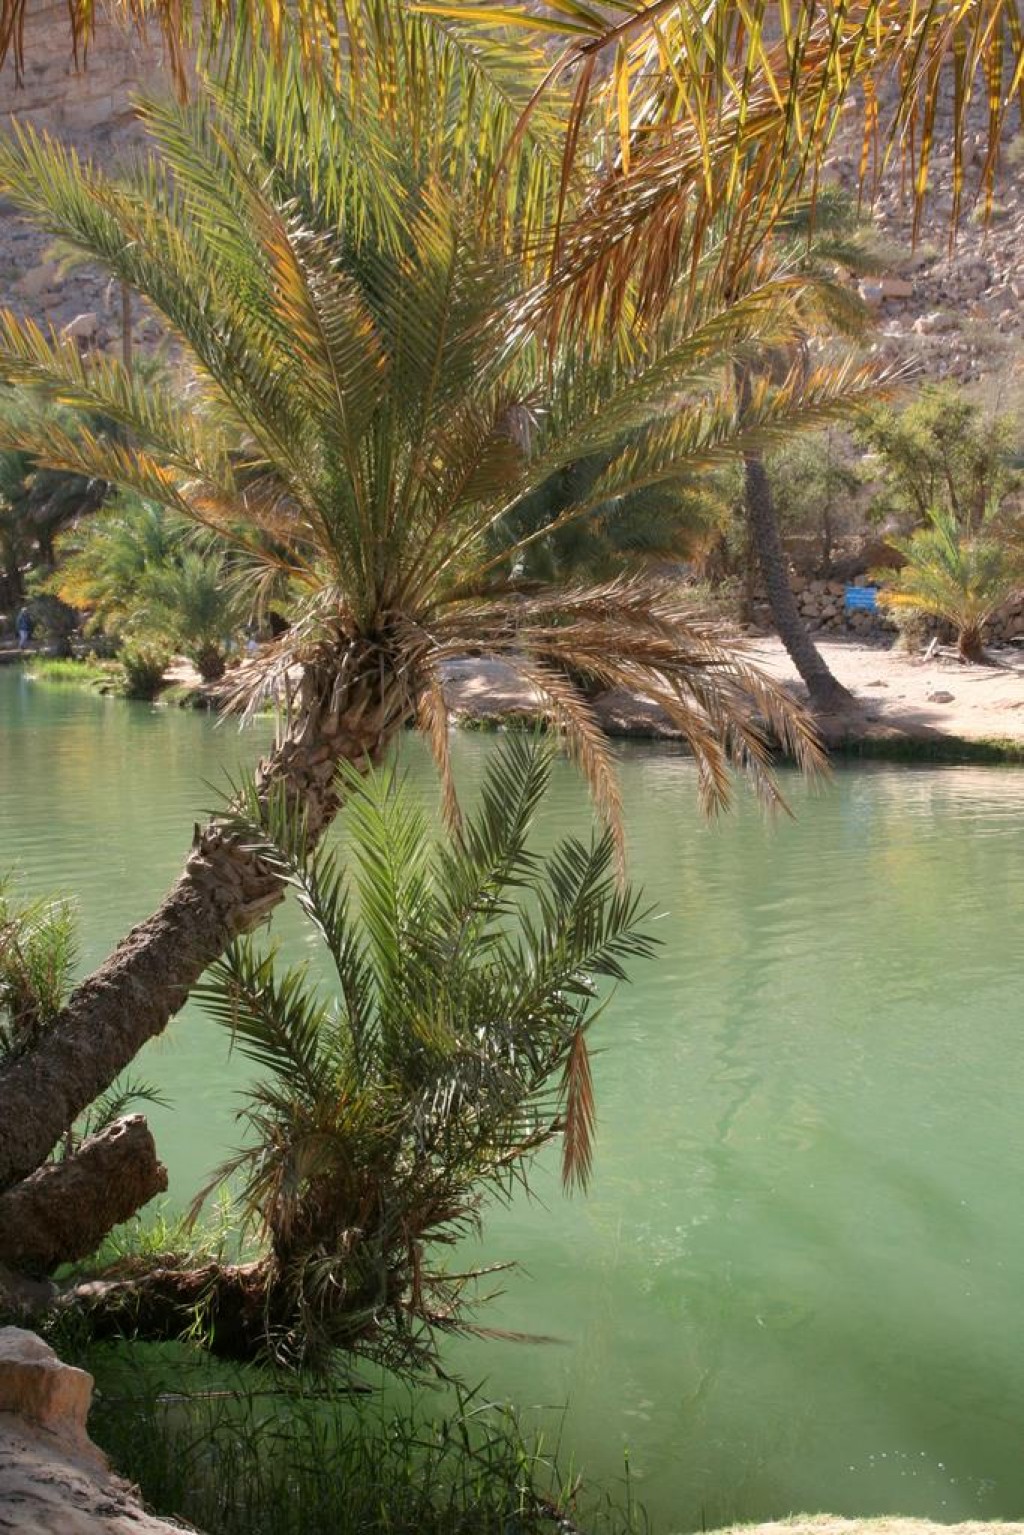 After the too-short trip to the dunes, we went to Wadi Bani Khalid.